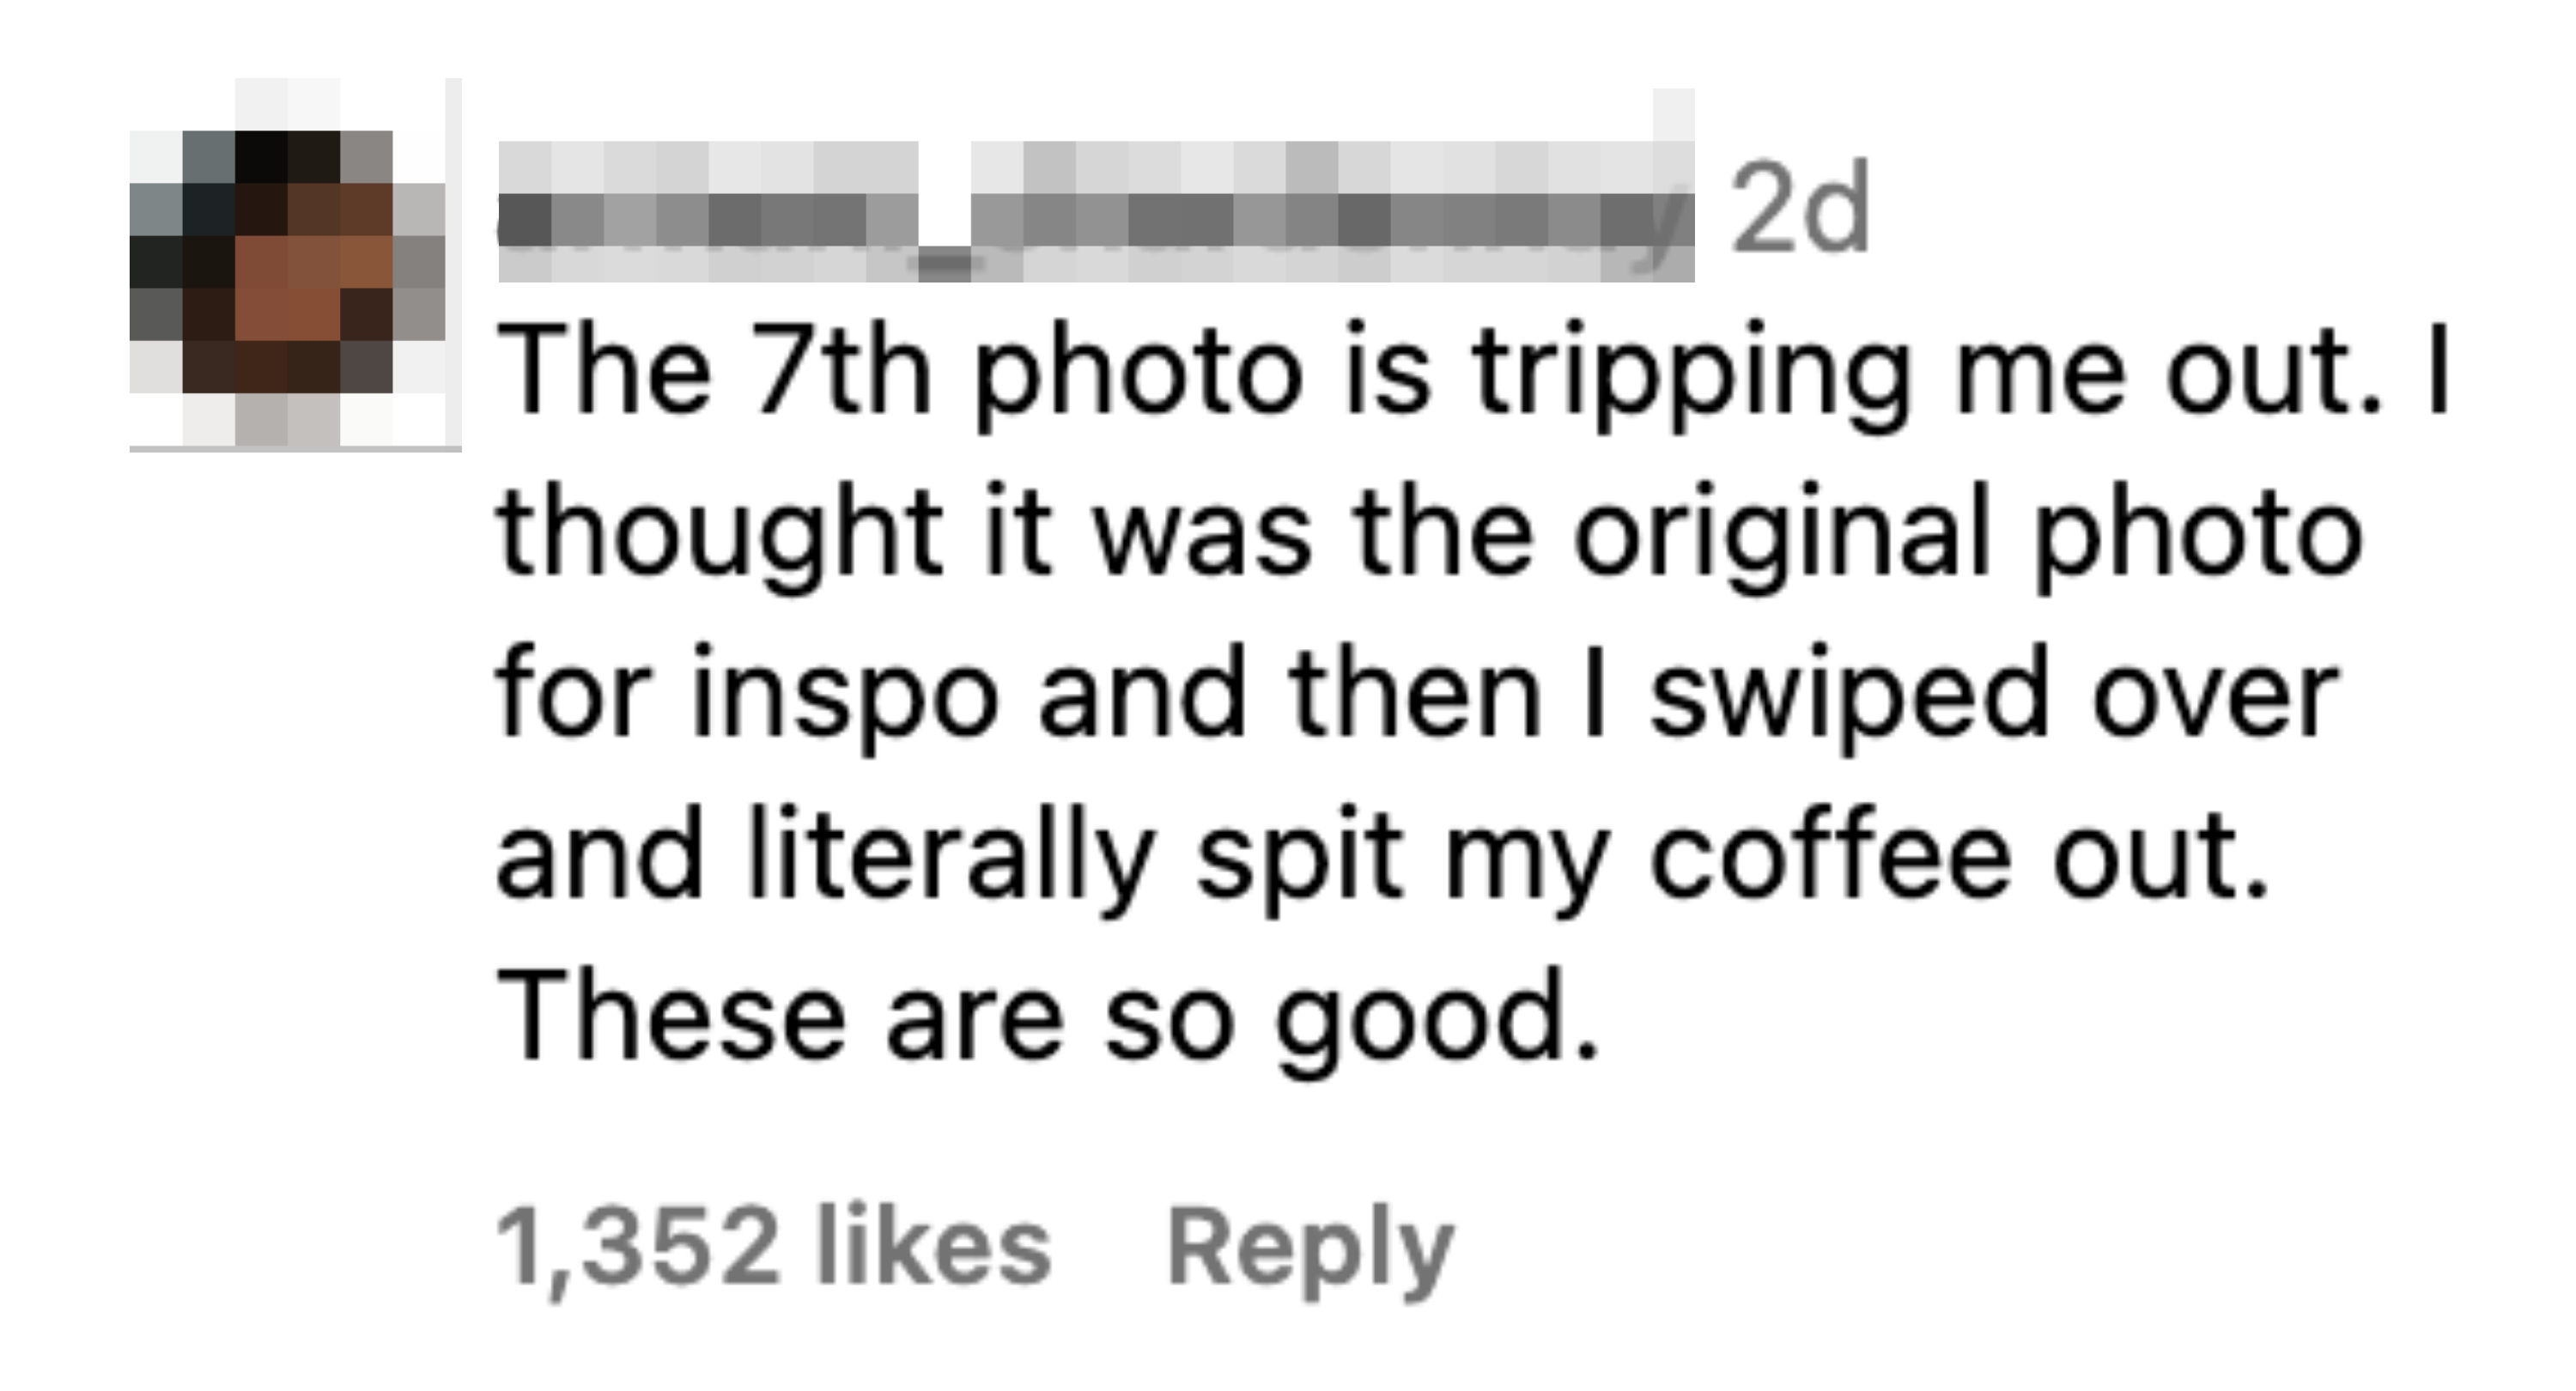 &quot;The 7th photo is tripping me out&quot;